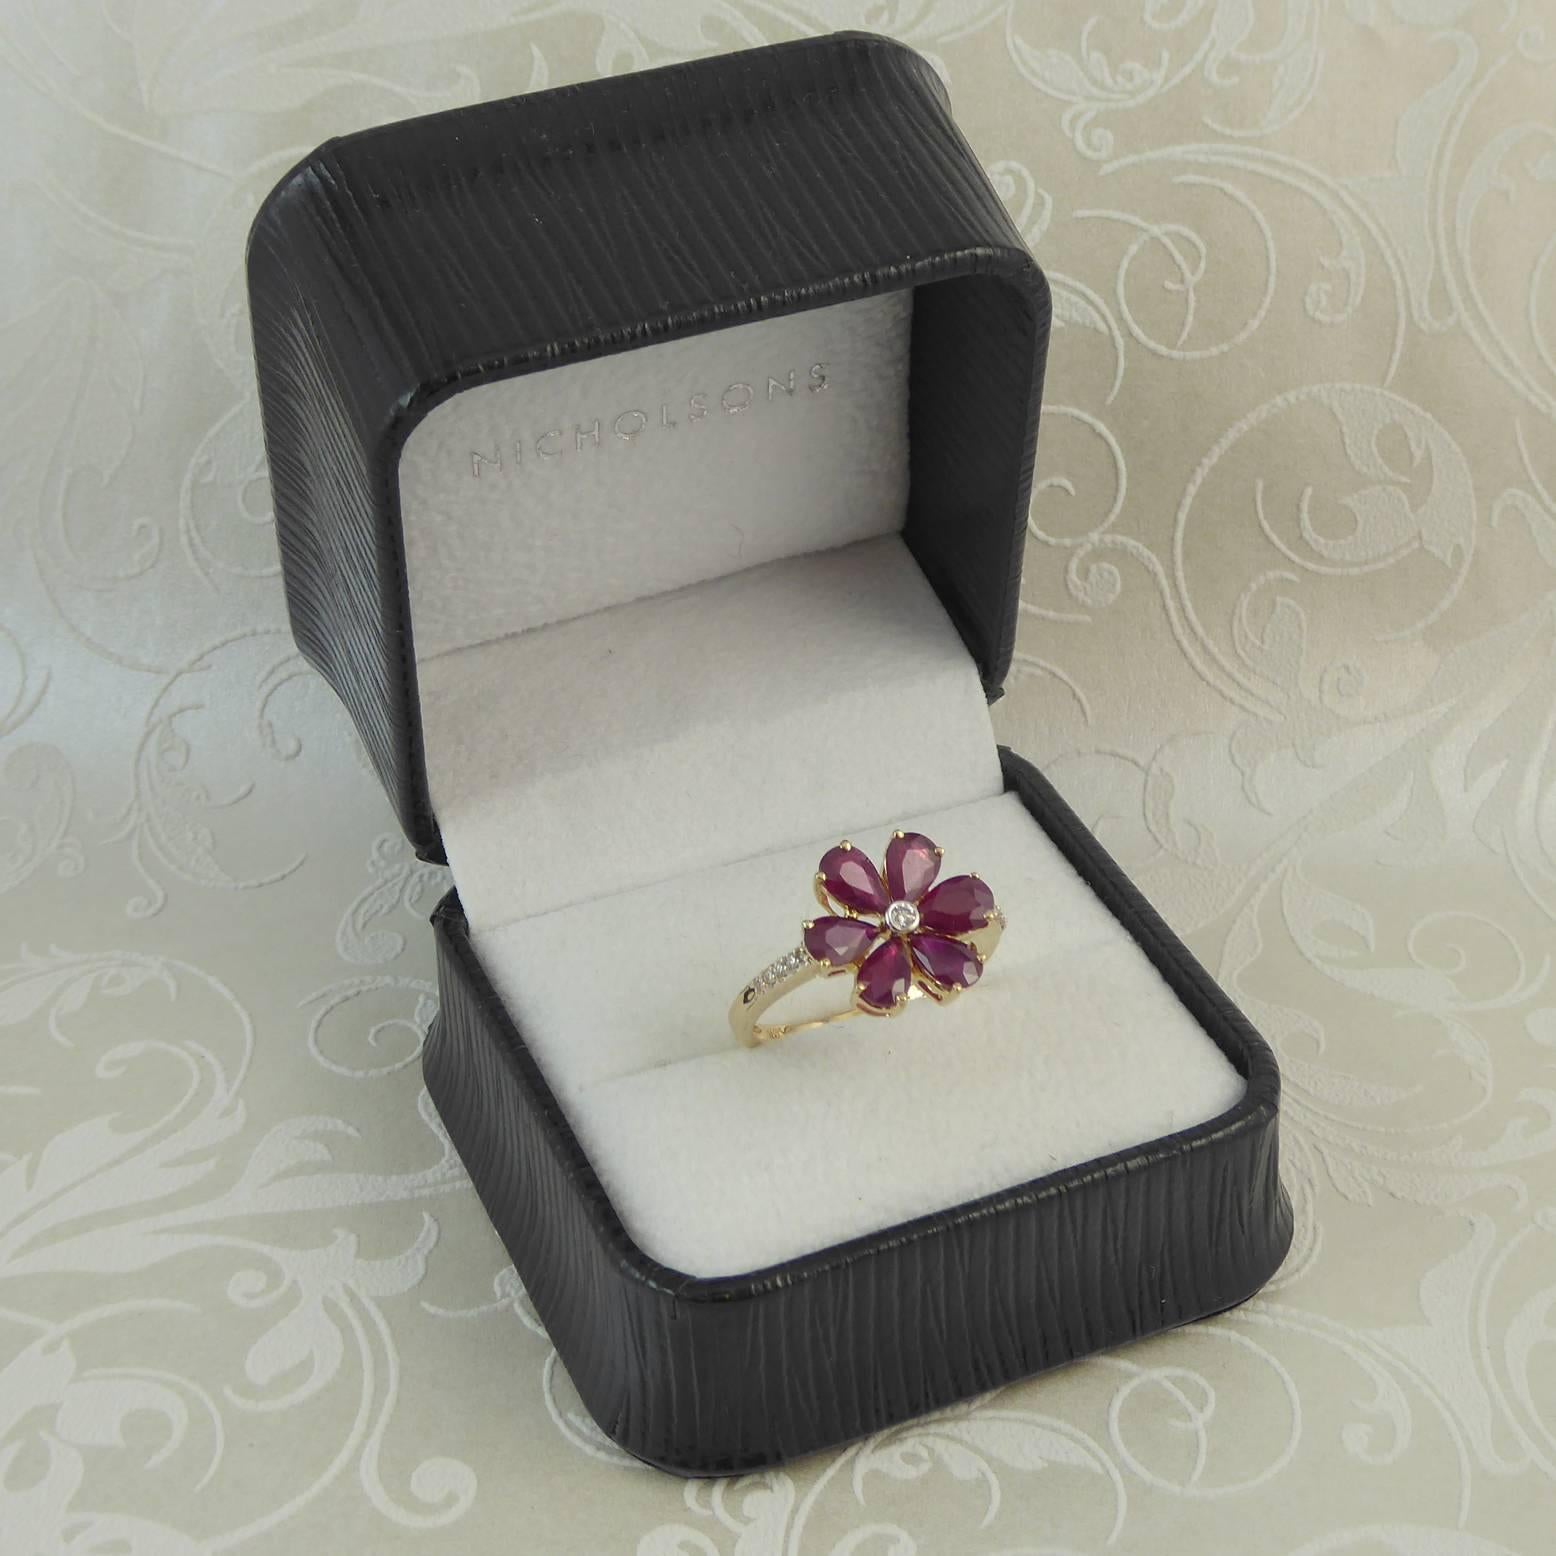 A vintage ruby and diamond cluster with with a very pretty spin on the daisy design being set with rubies as opposed to the more often seen diamonds.  It is a very neat design and makes a perfect dress or cocktail ring for the petite hand.  Cute and